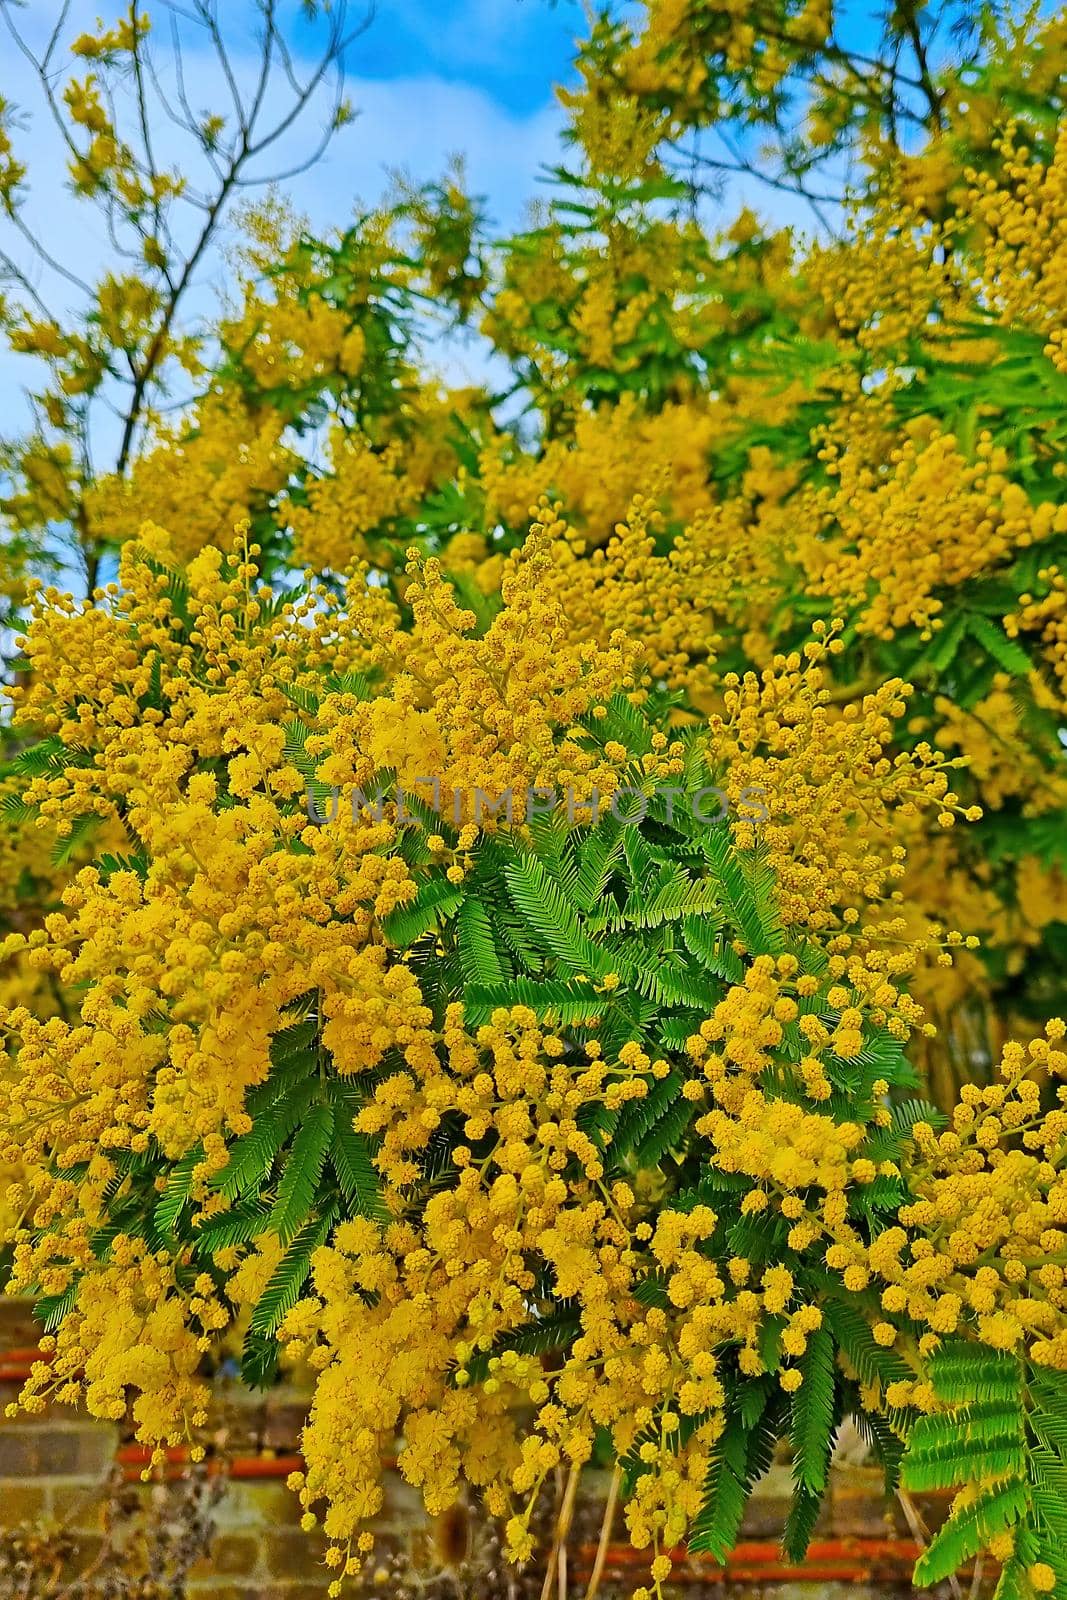 Flowering yellow tansy bushes in the park in the spring